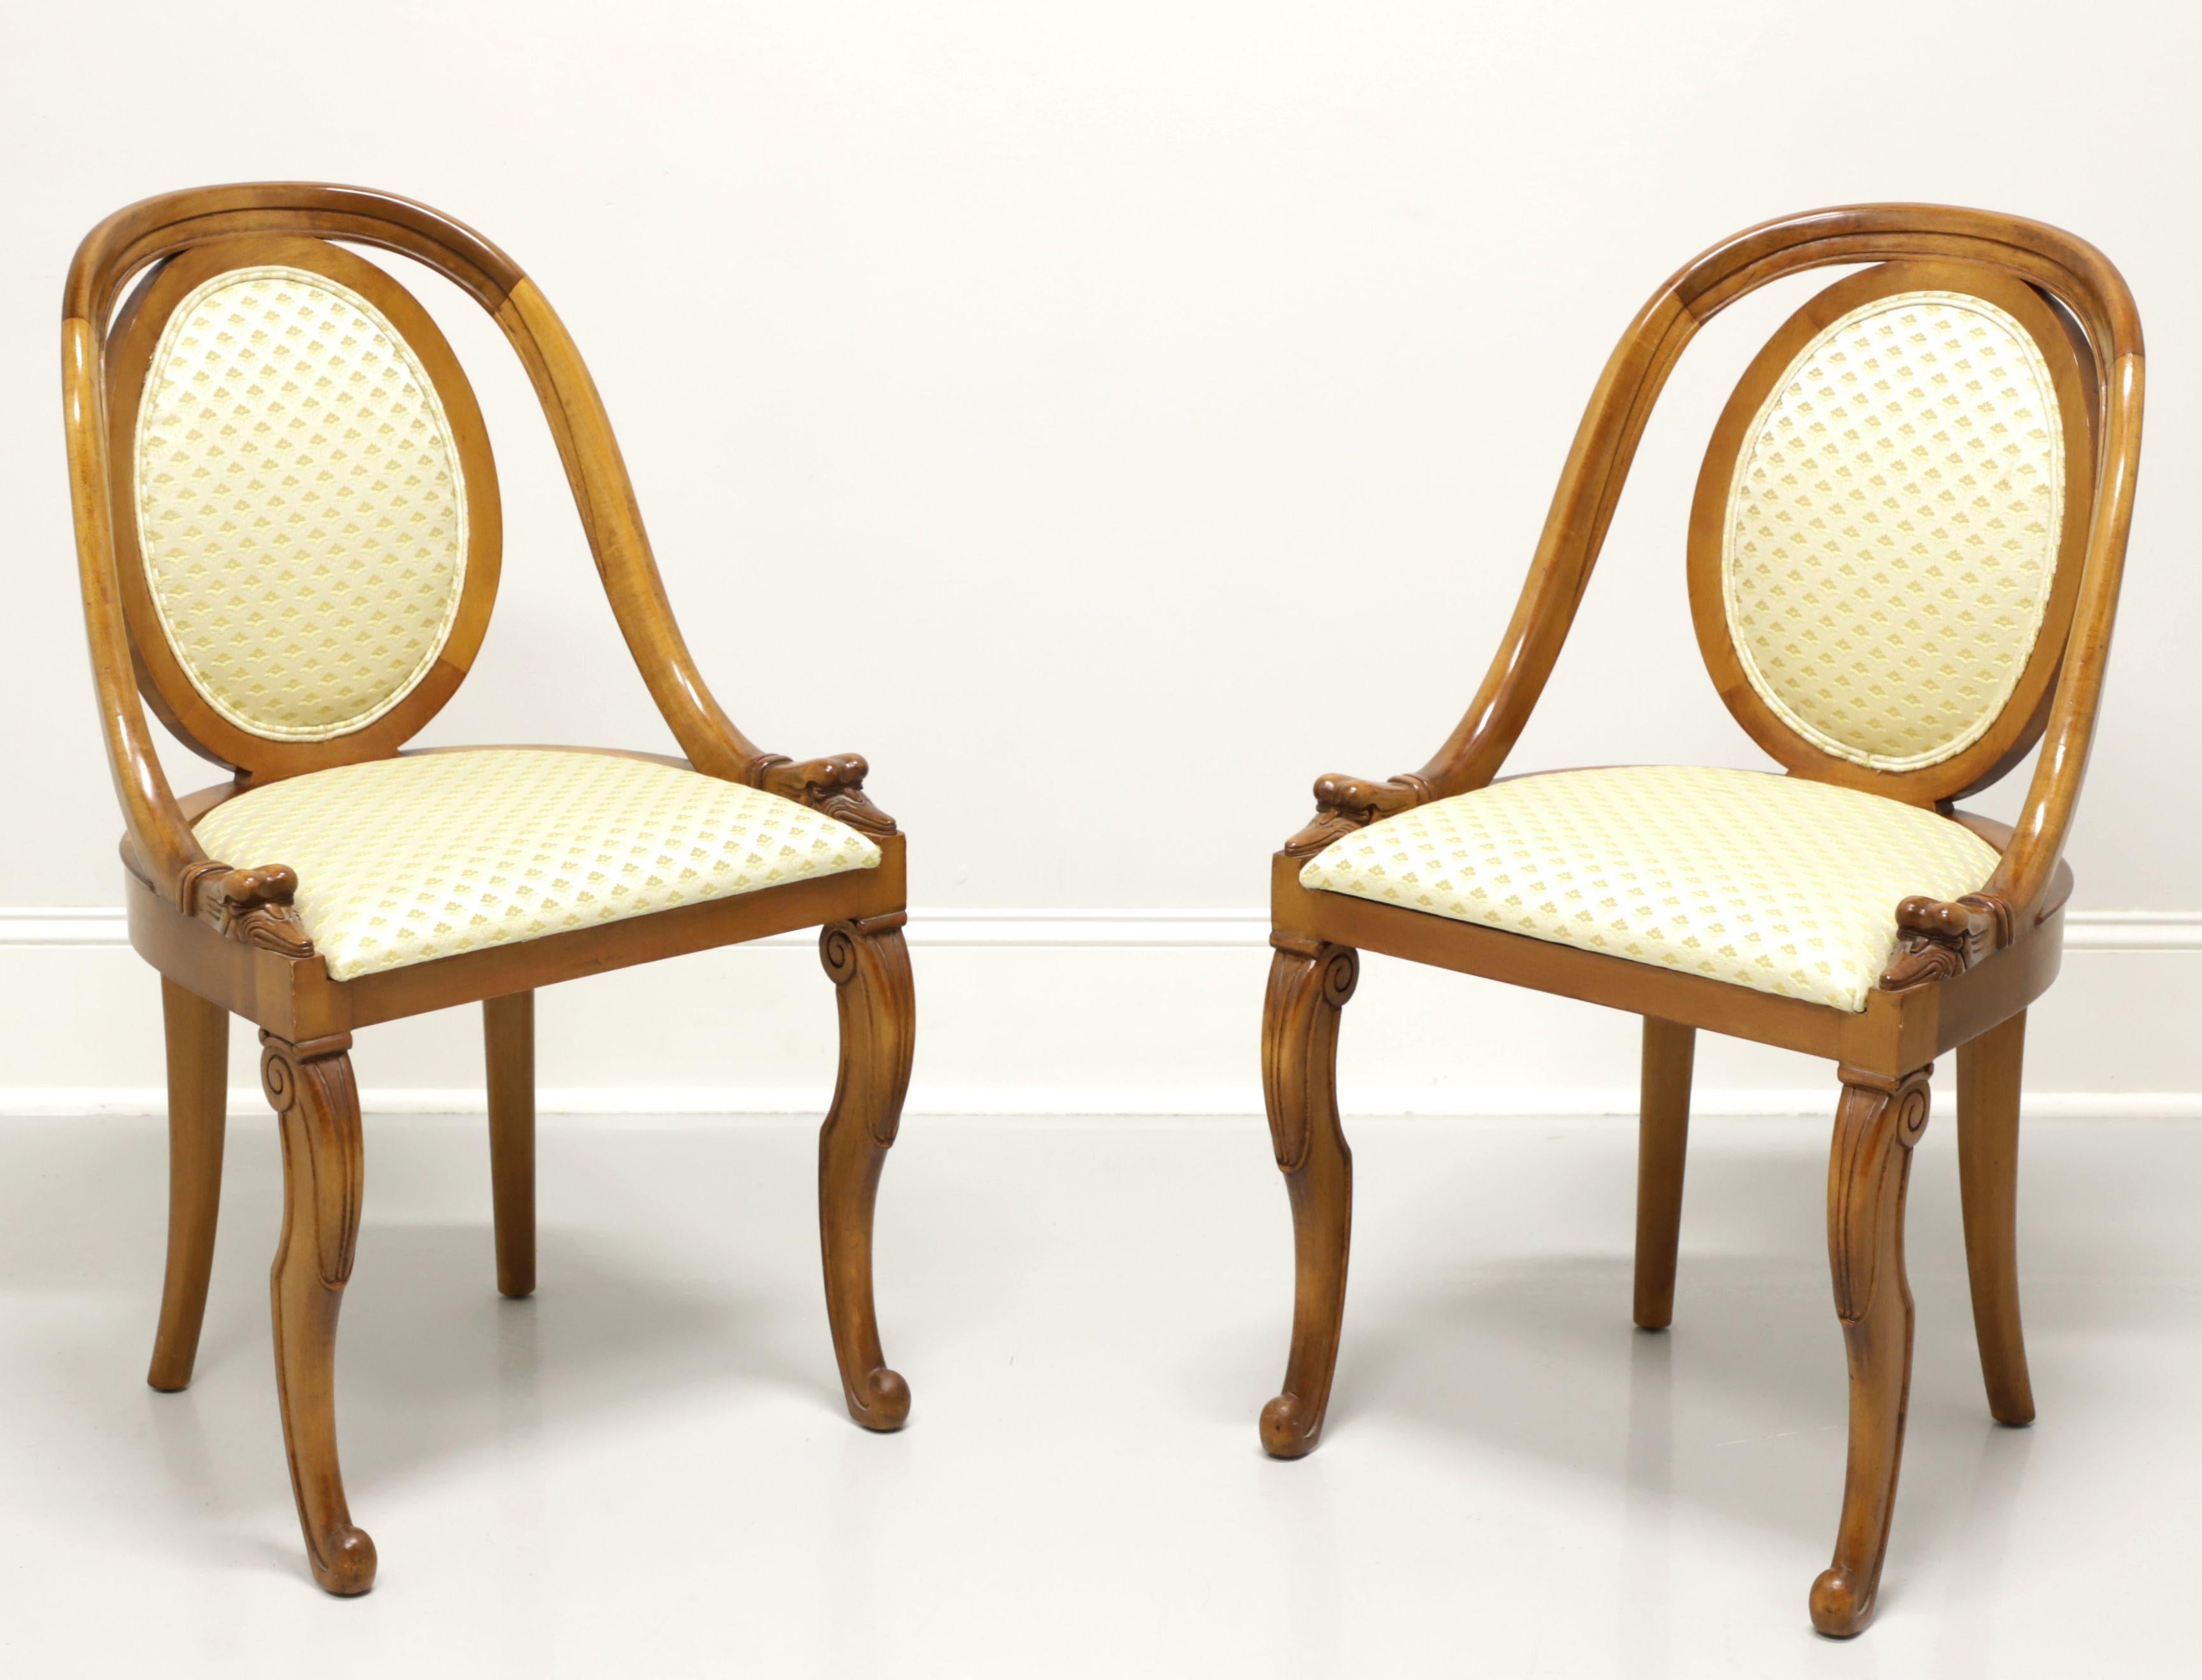 1920's French Art Deco Goosehead Dining Chairs - Pair C For Sale 5